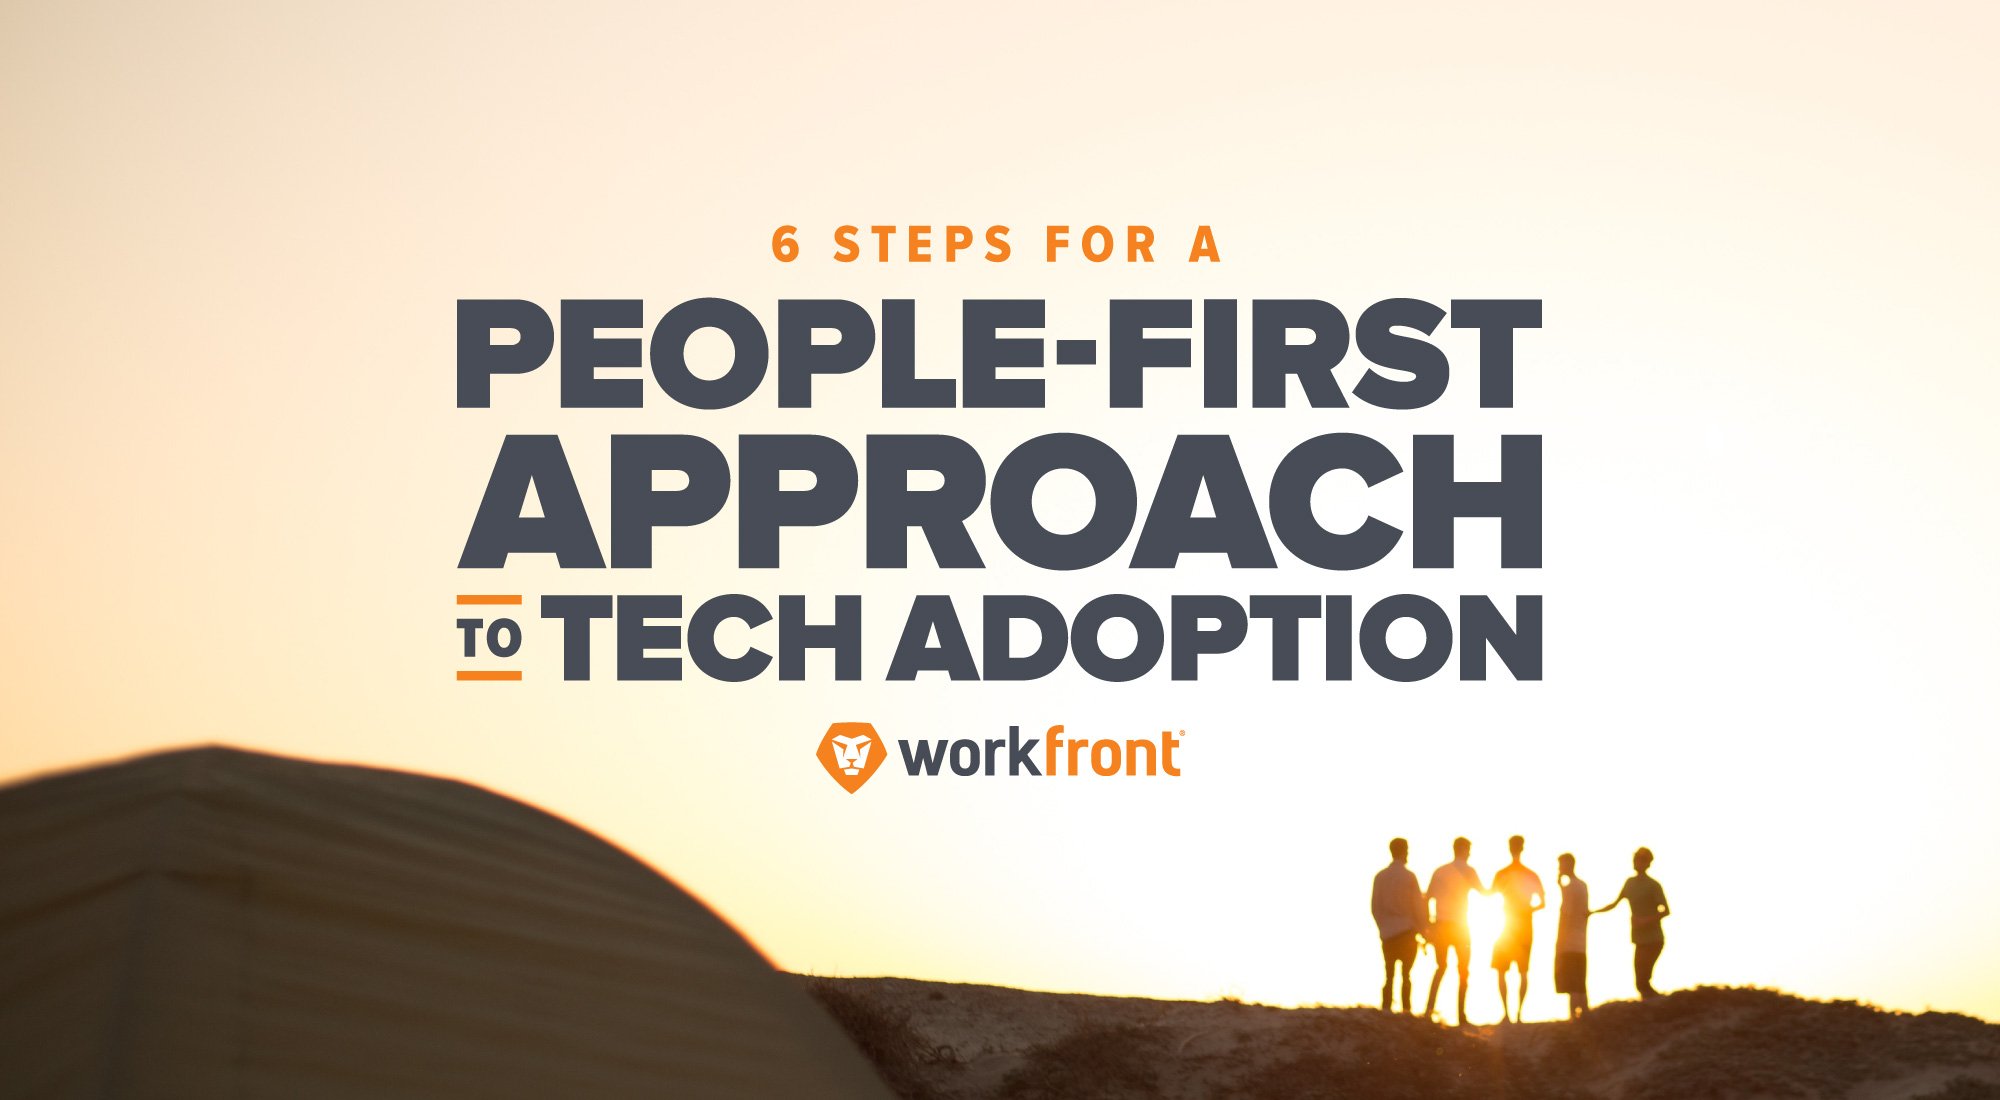 6 Steps for a People-First Approach to Tech Adoption